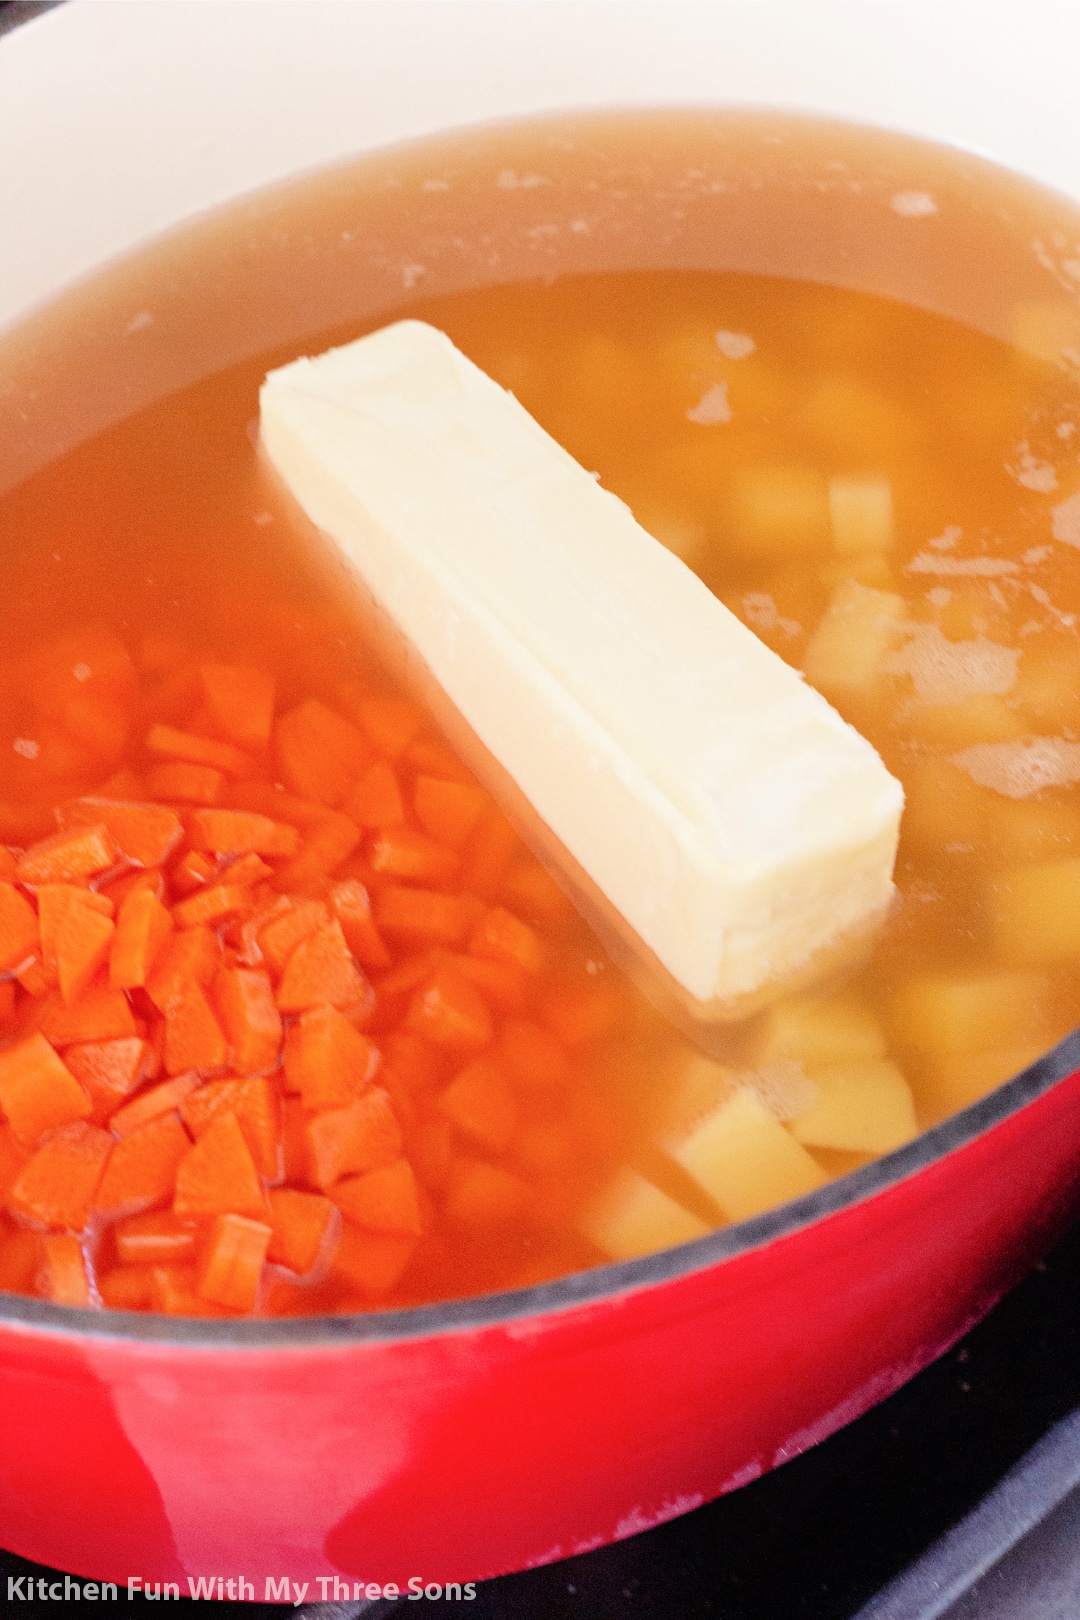 A stick of butter melting into a pot full of chicken broth, diced carrots and cubed potatoes